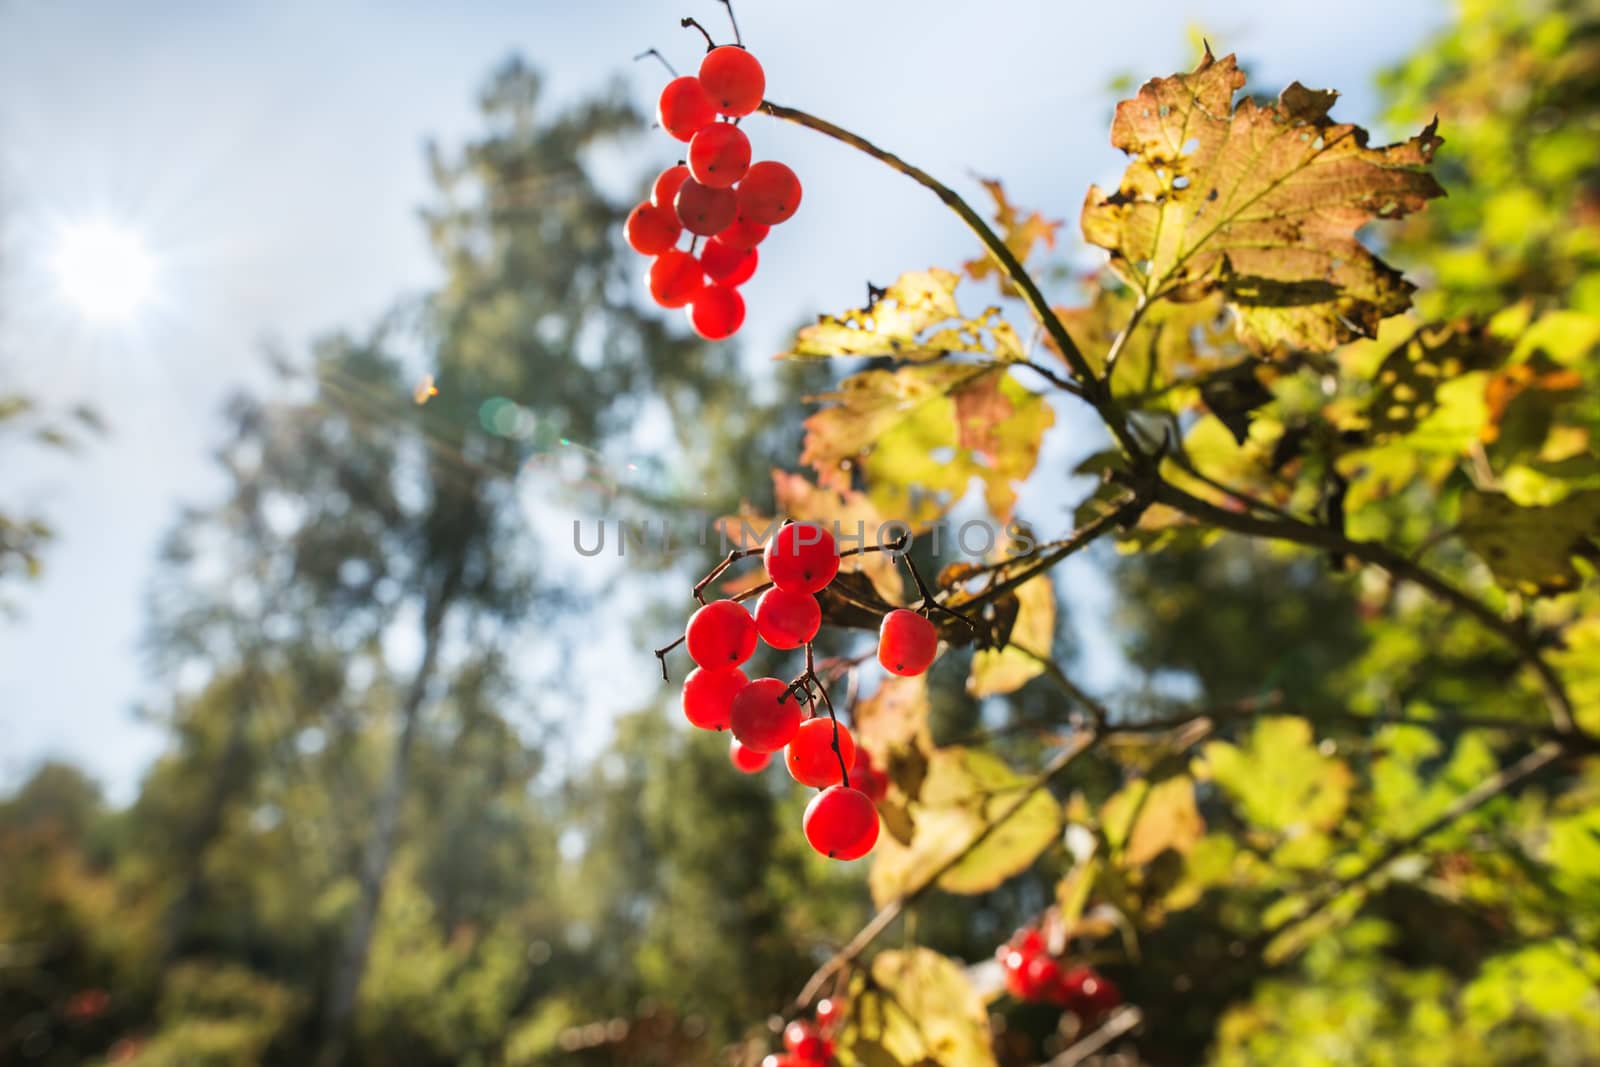 Guelder-rose berries in the autumn wood lit with the sun